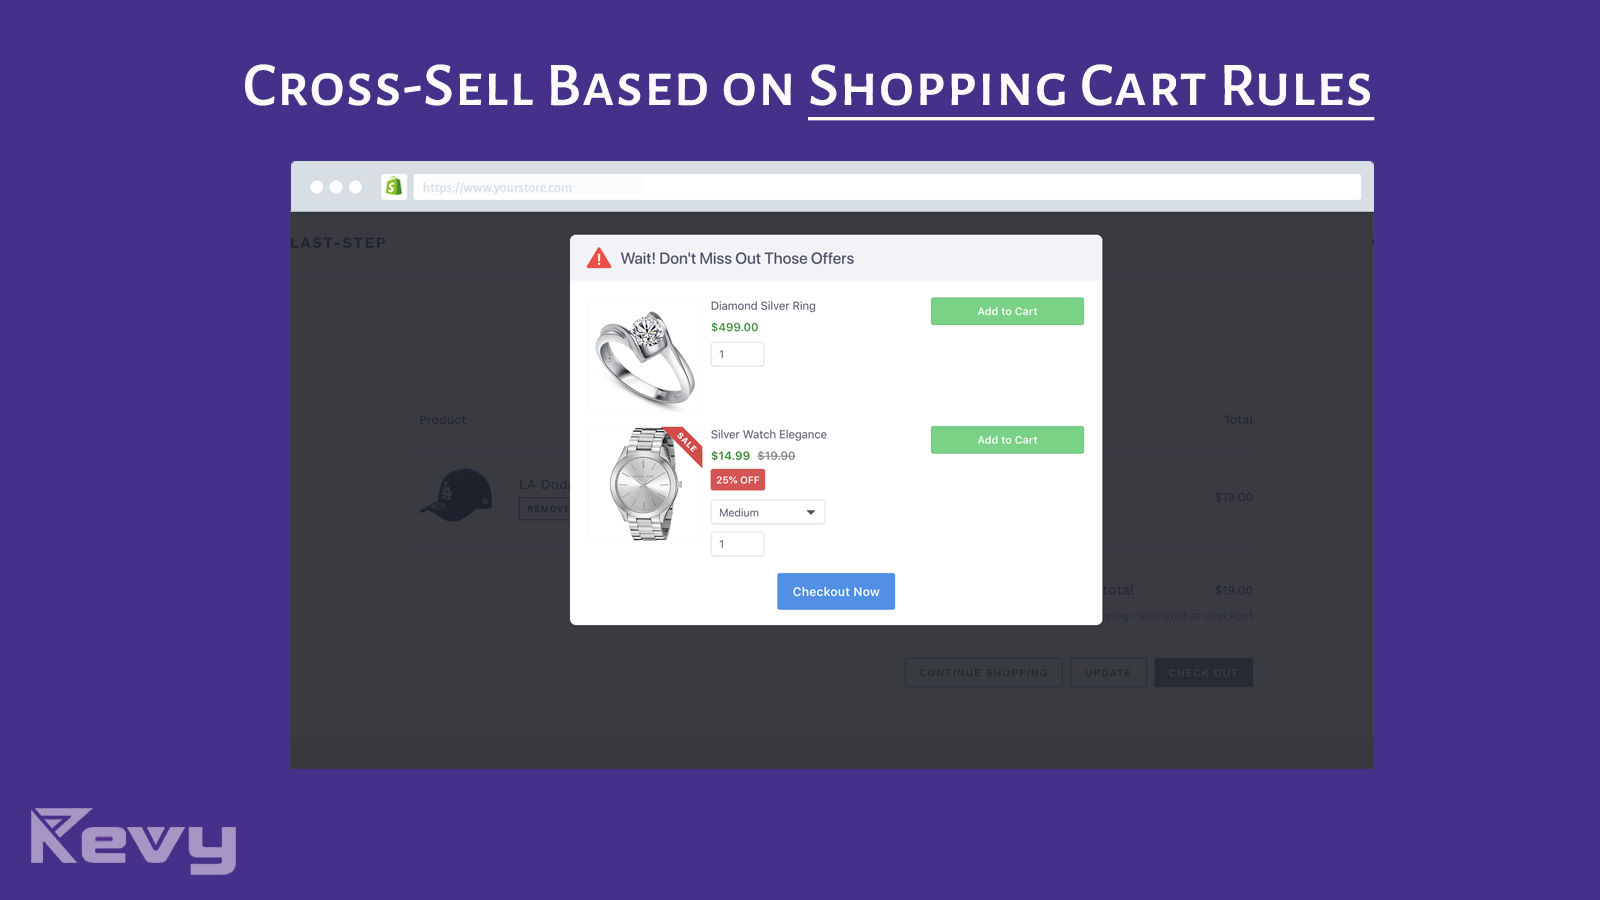 Cross sell based on cart rules: cart products or cart value